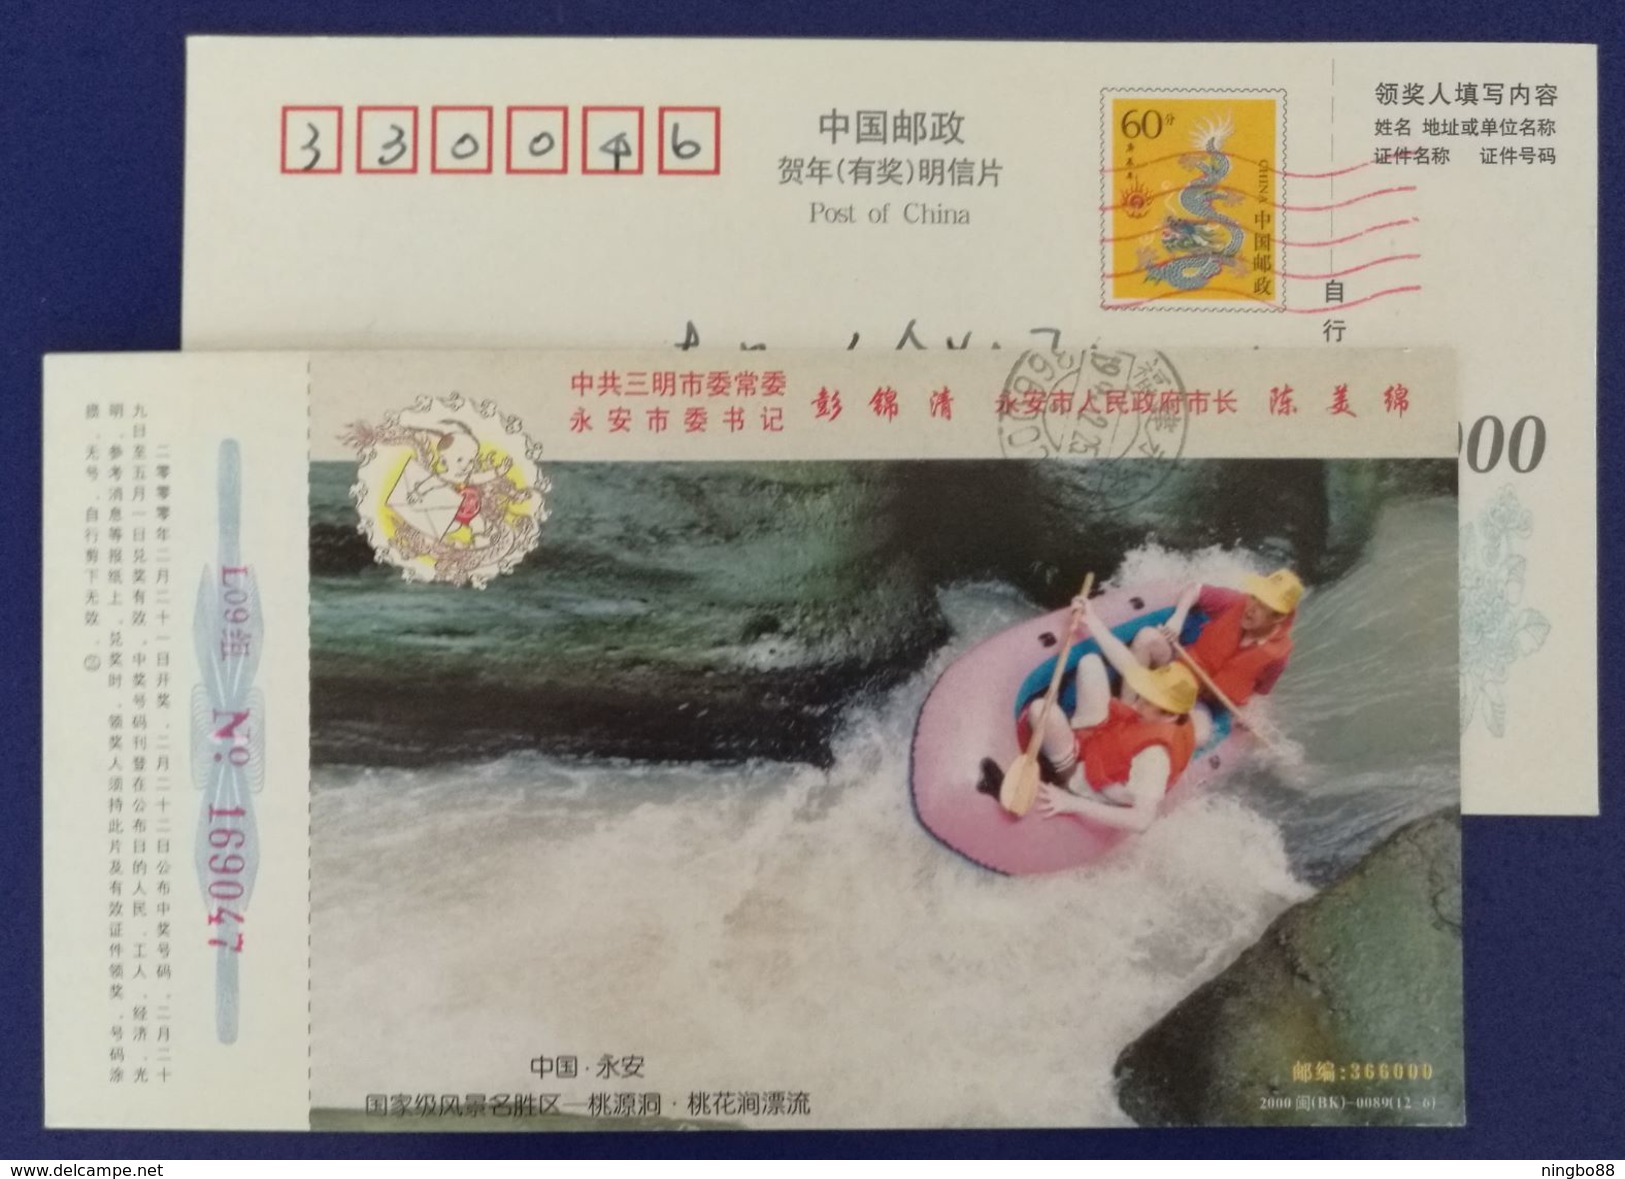 Gorge River Rafting On Rubber Boat,China 2000 Yong'an National Scenic Spot Tourism Advertising Pre-stamped Card - Rafting